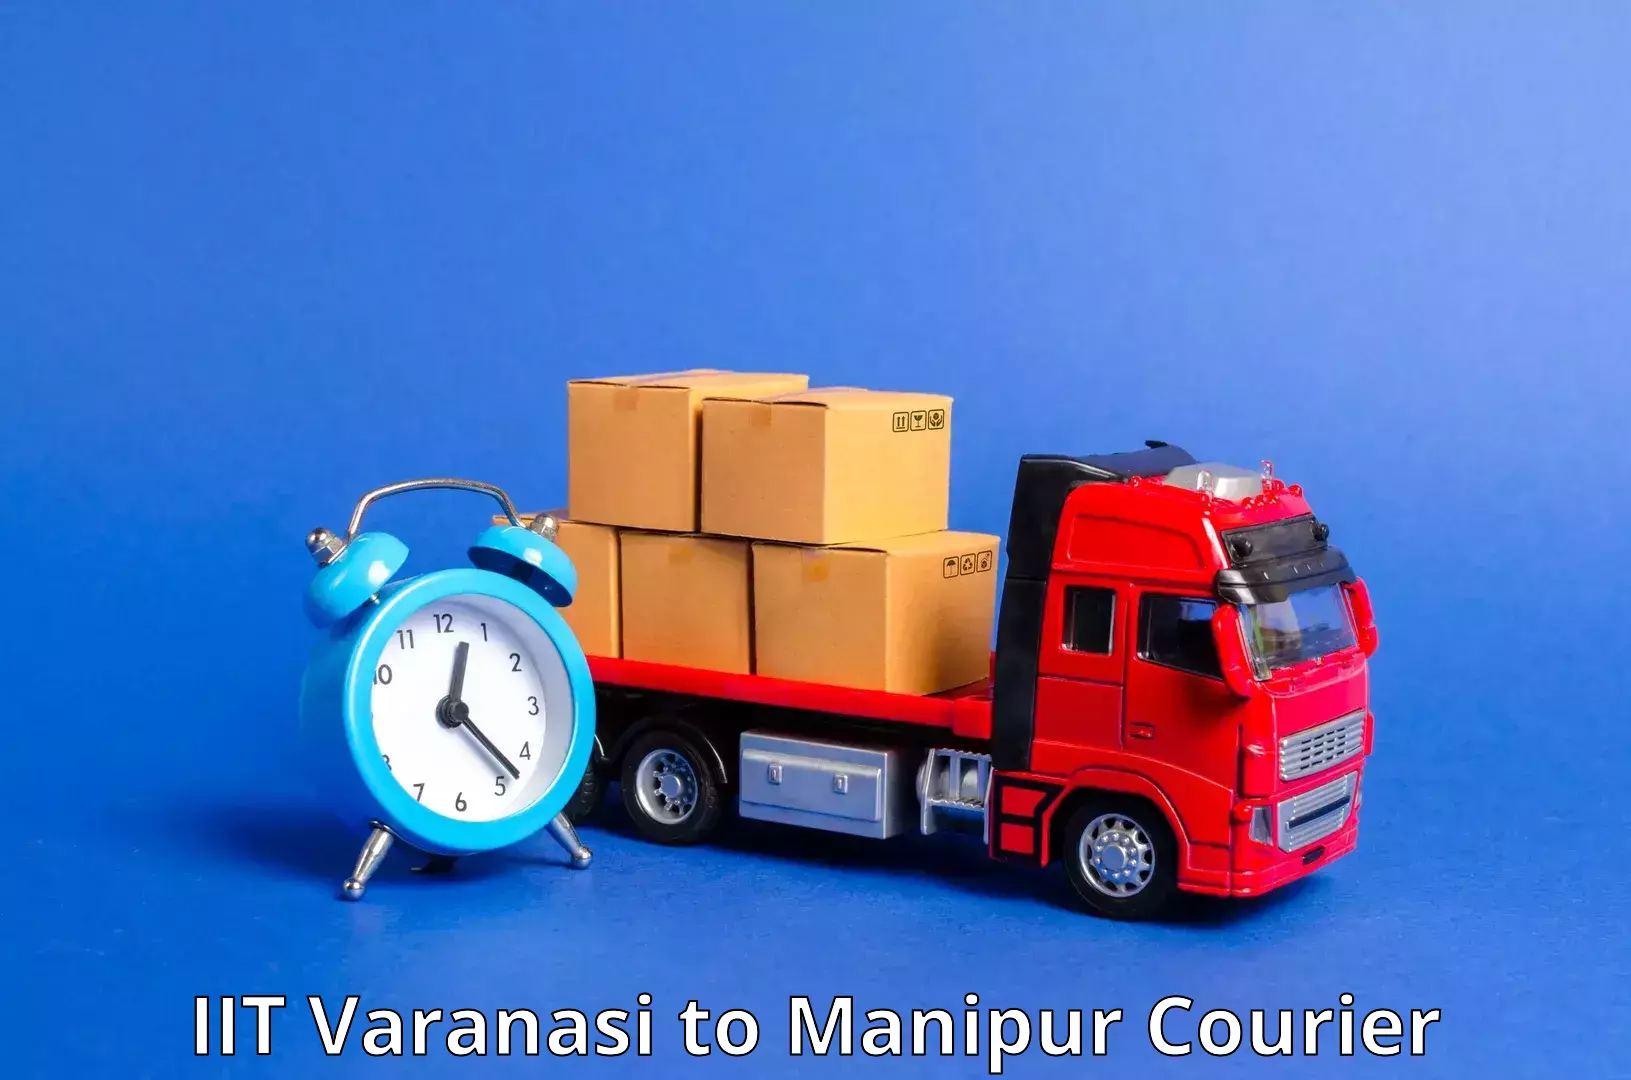 Comprehensive shipping services in IIT Varanasi to Manipur